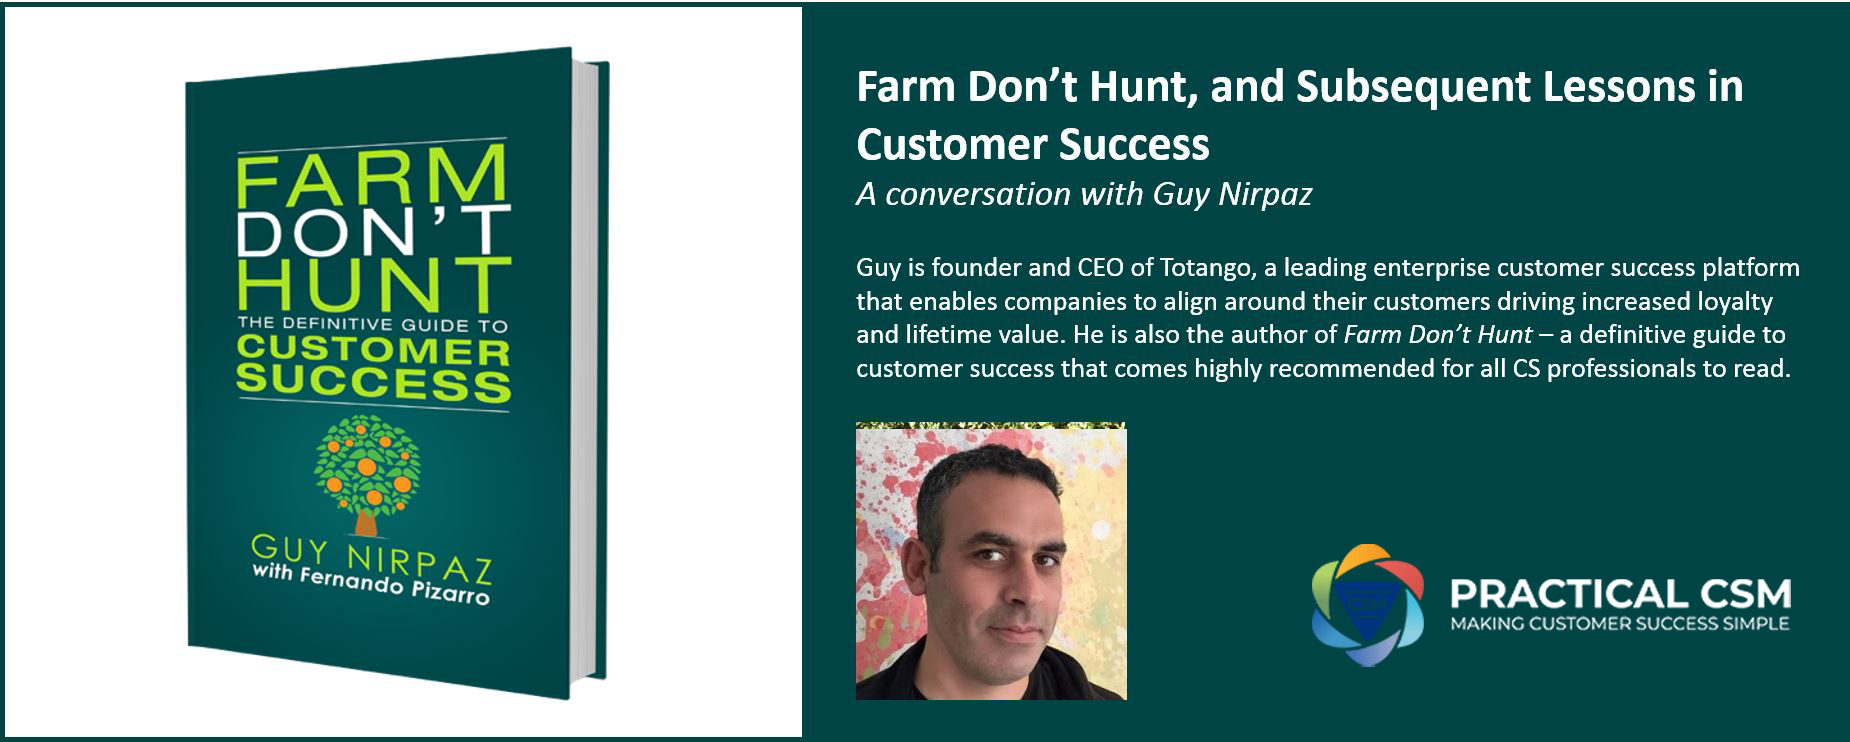 Farm Don’t Hunt, and Subsequent Lessons in Customer Success (Audio)- Practical CSM